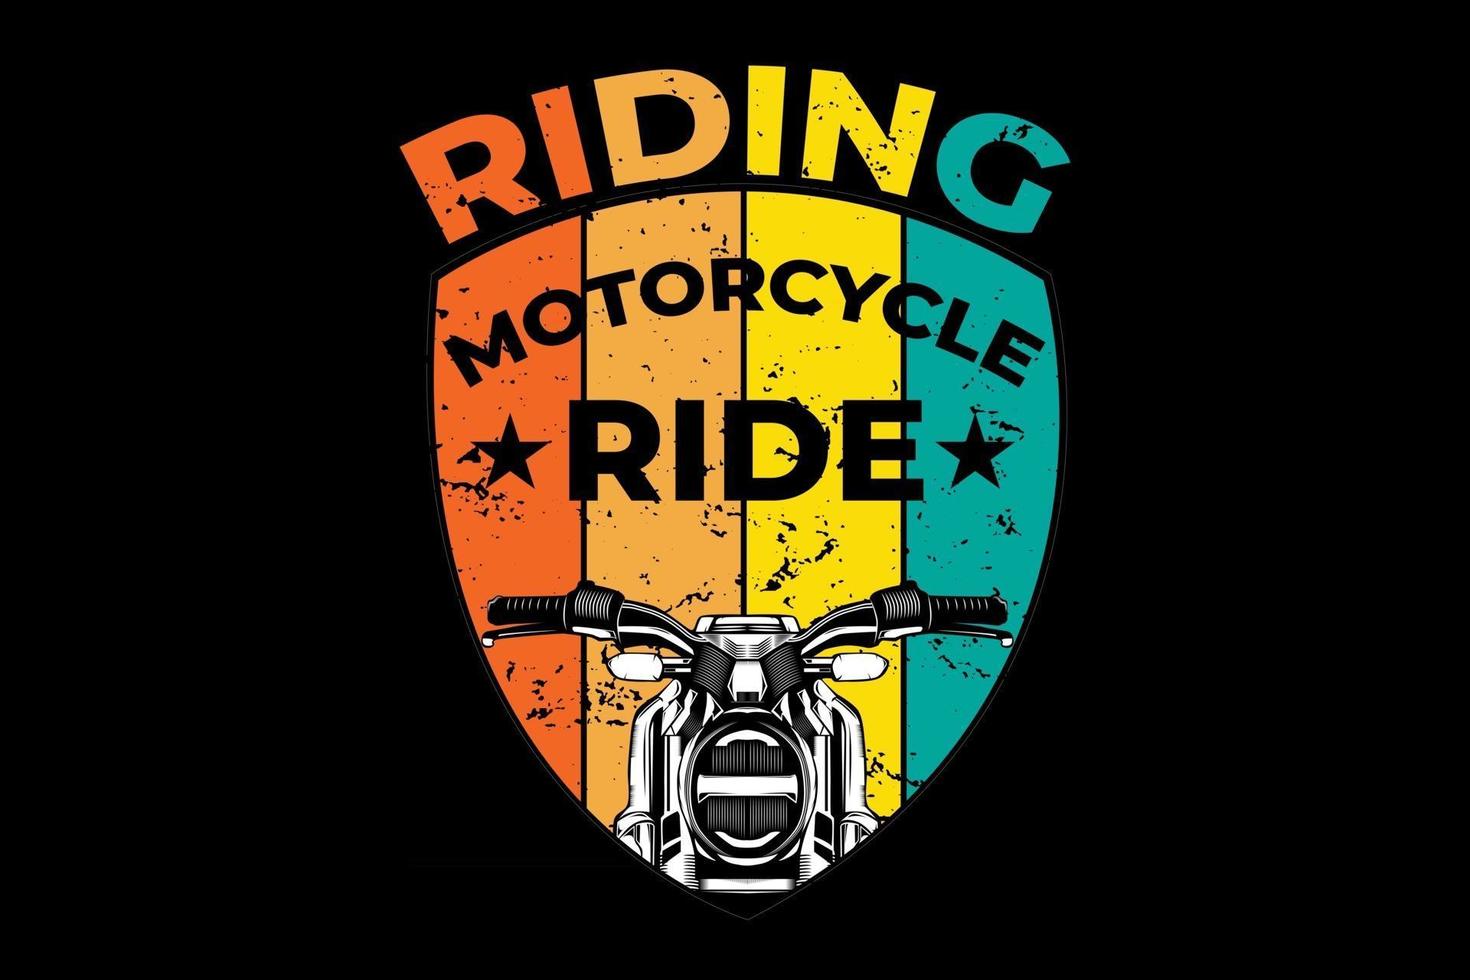 T-shirt motorcycle ride retro vintage style vector